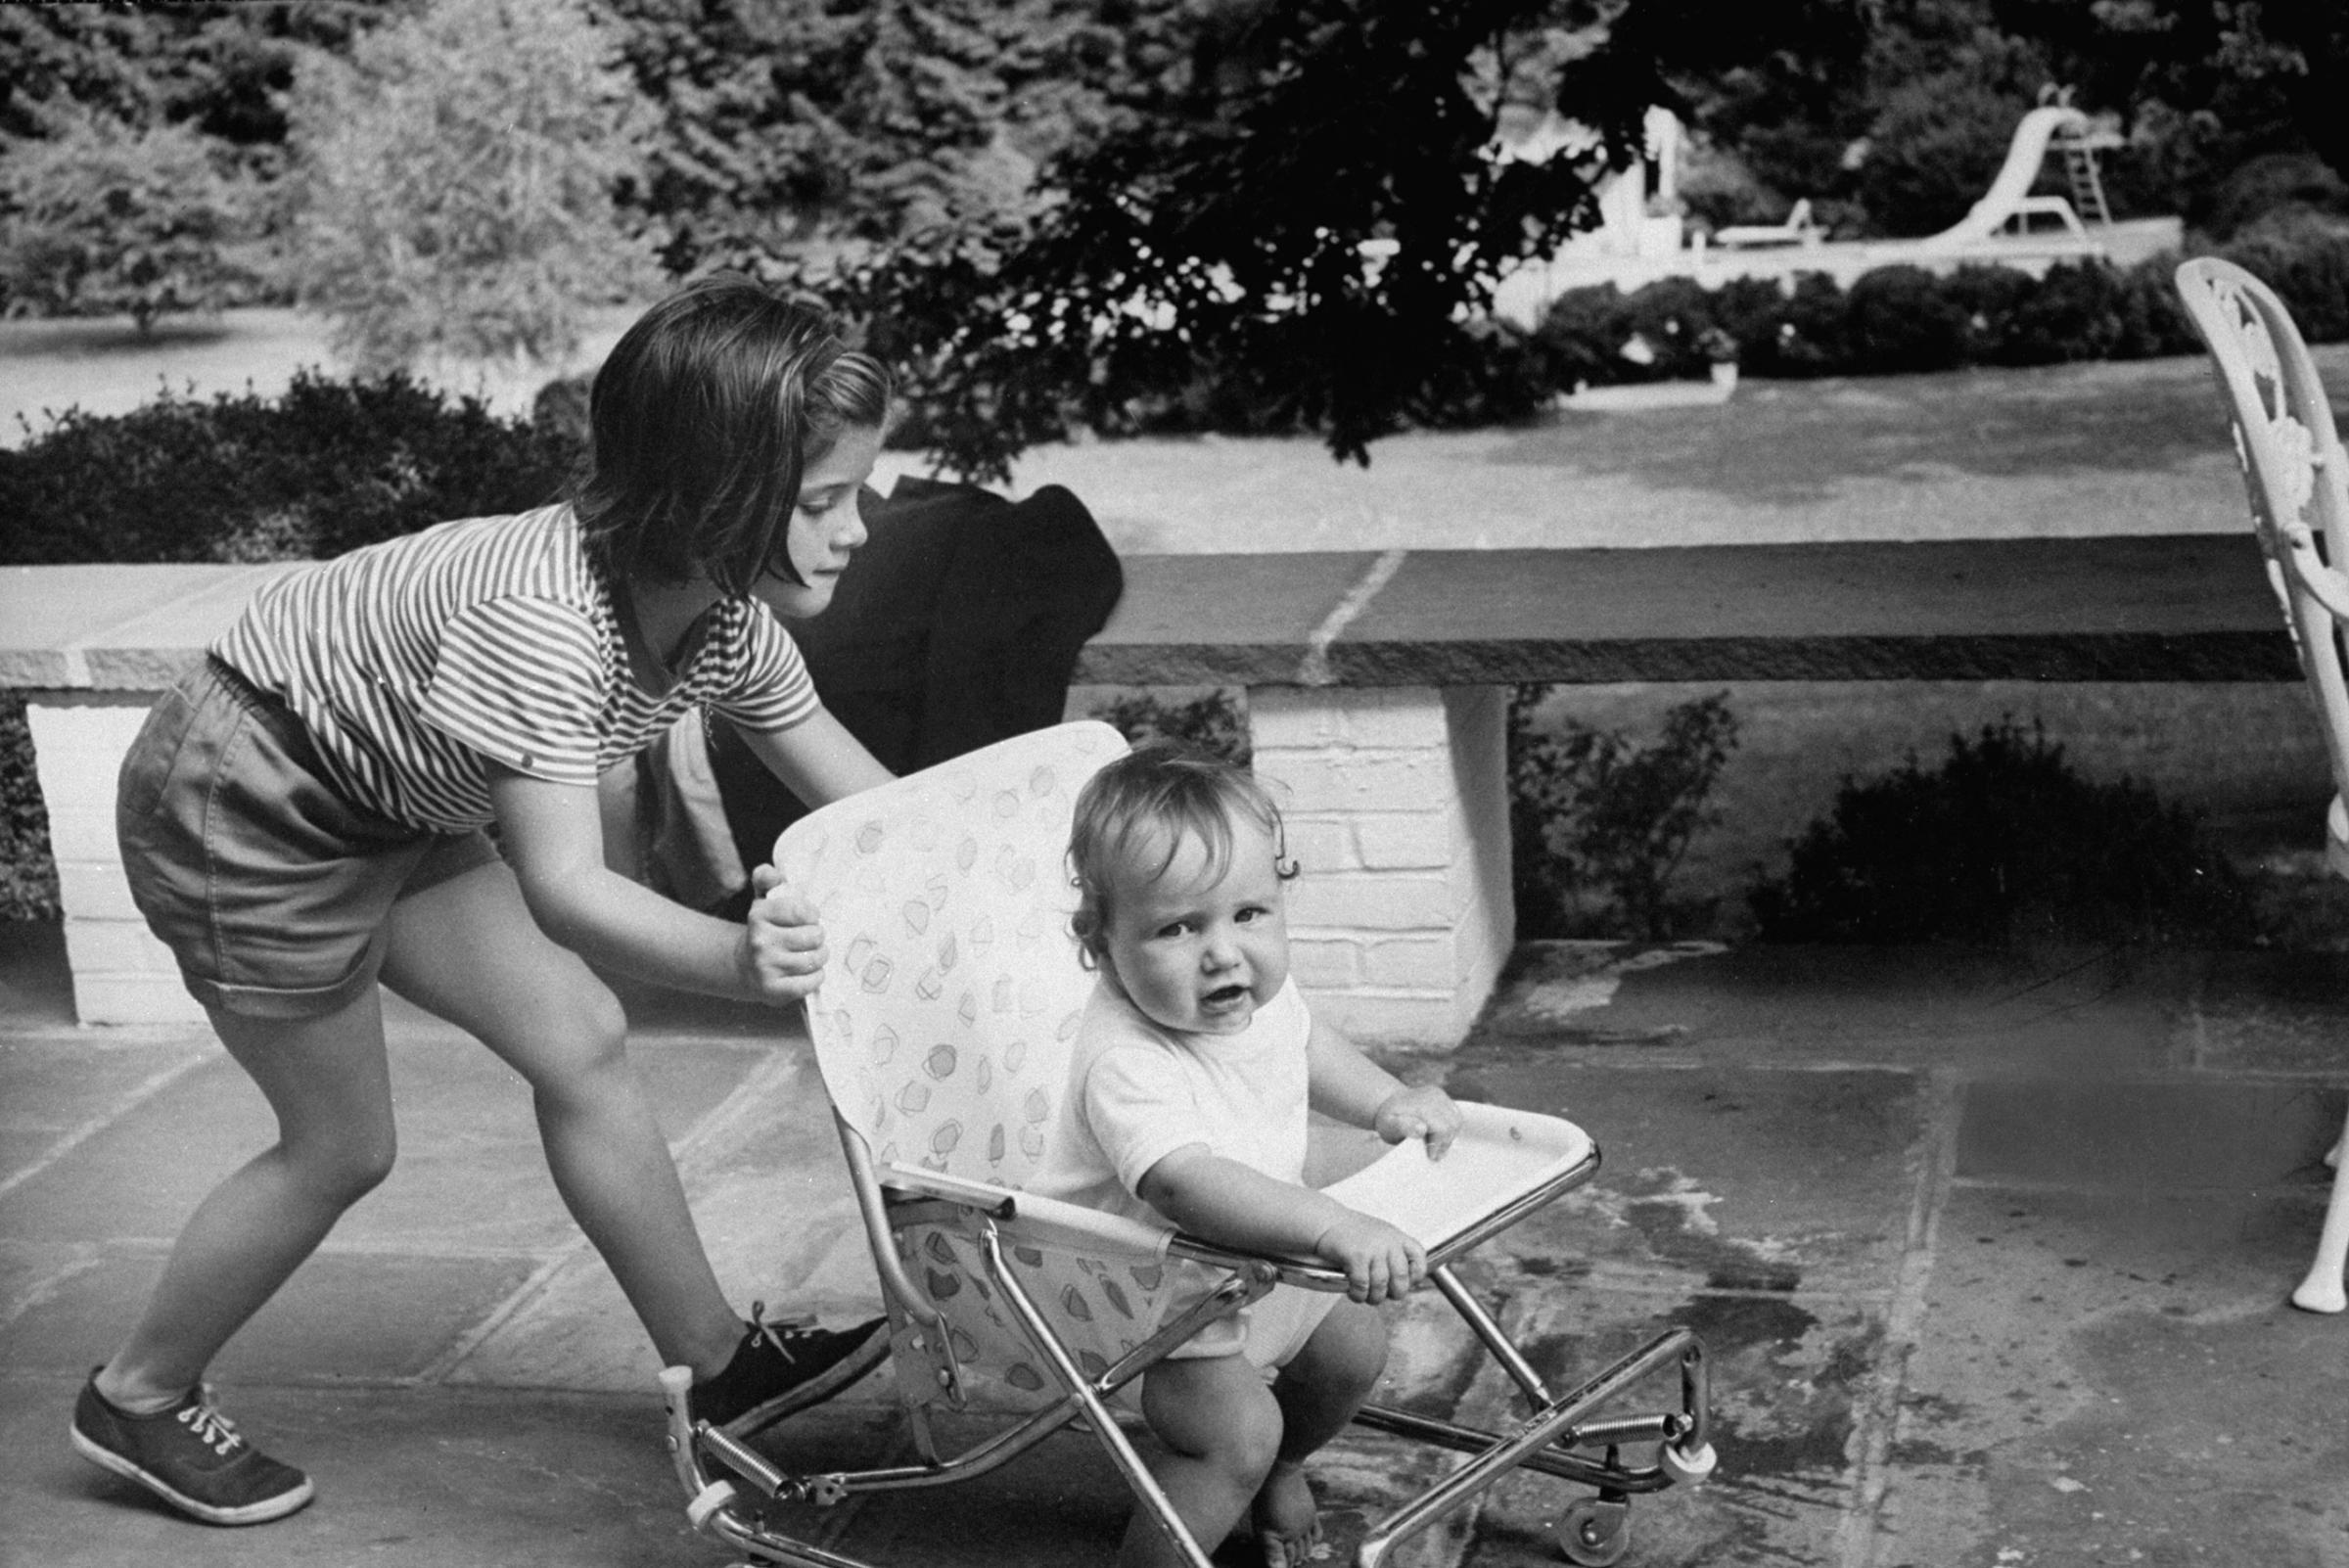 John Kennedy's daughter has eagerly joined Bob's family. She loves to push Christopher in his stroller, stops to cling for a moment to her Uncle Bob. 'She's my pal,' he says fondly. But there is a special feeling for Caroline who, at 6, understands the tragedy of her father's death as her brother John does not.